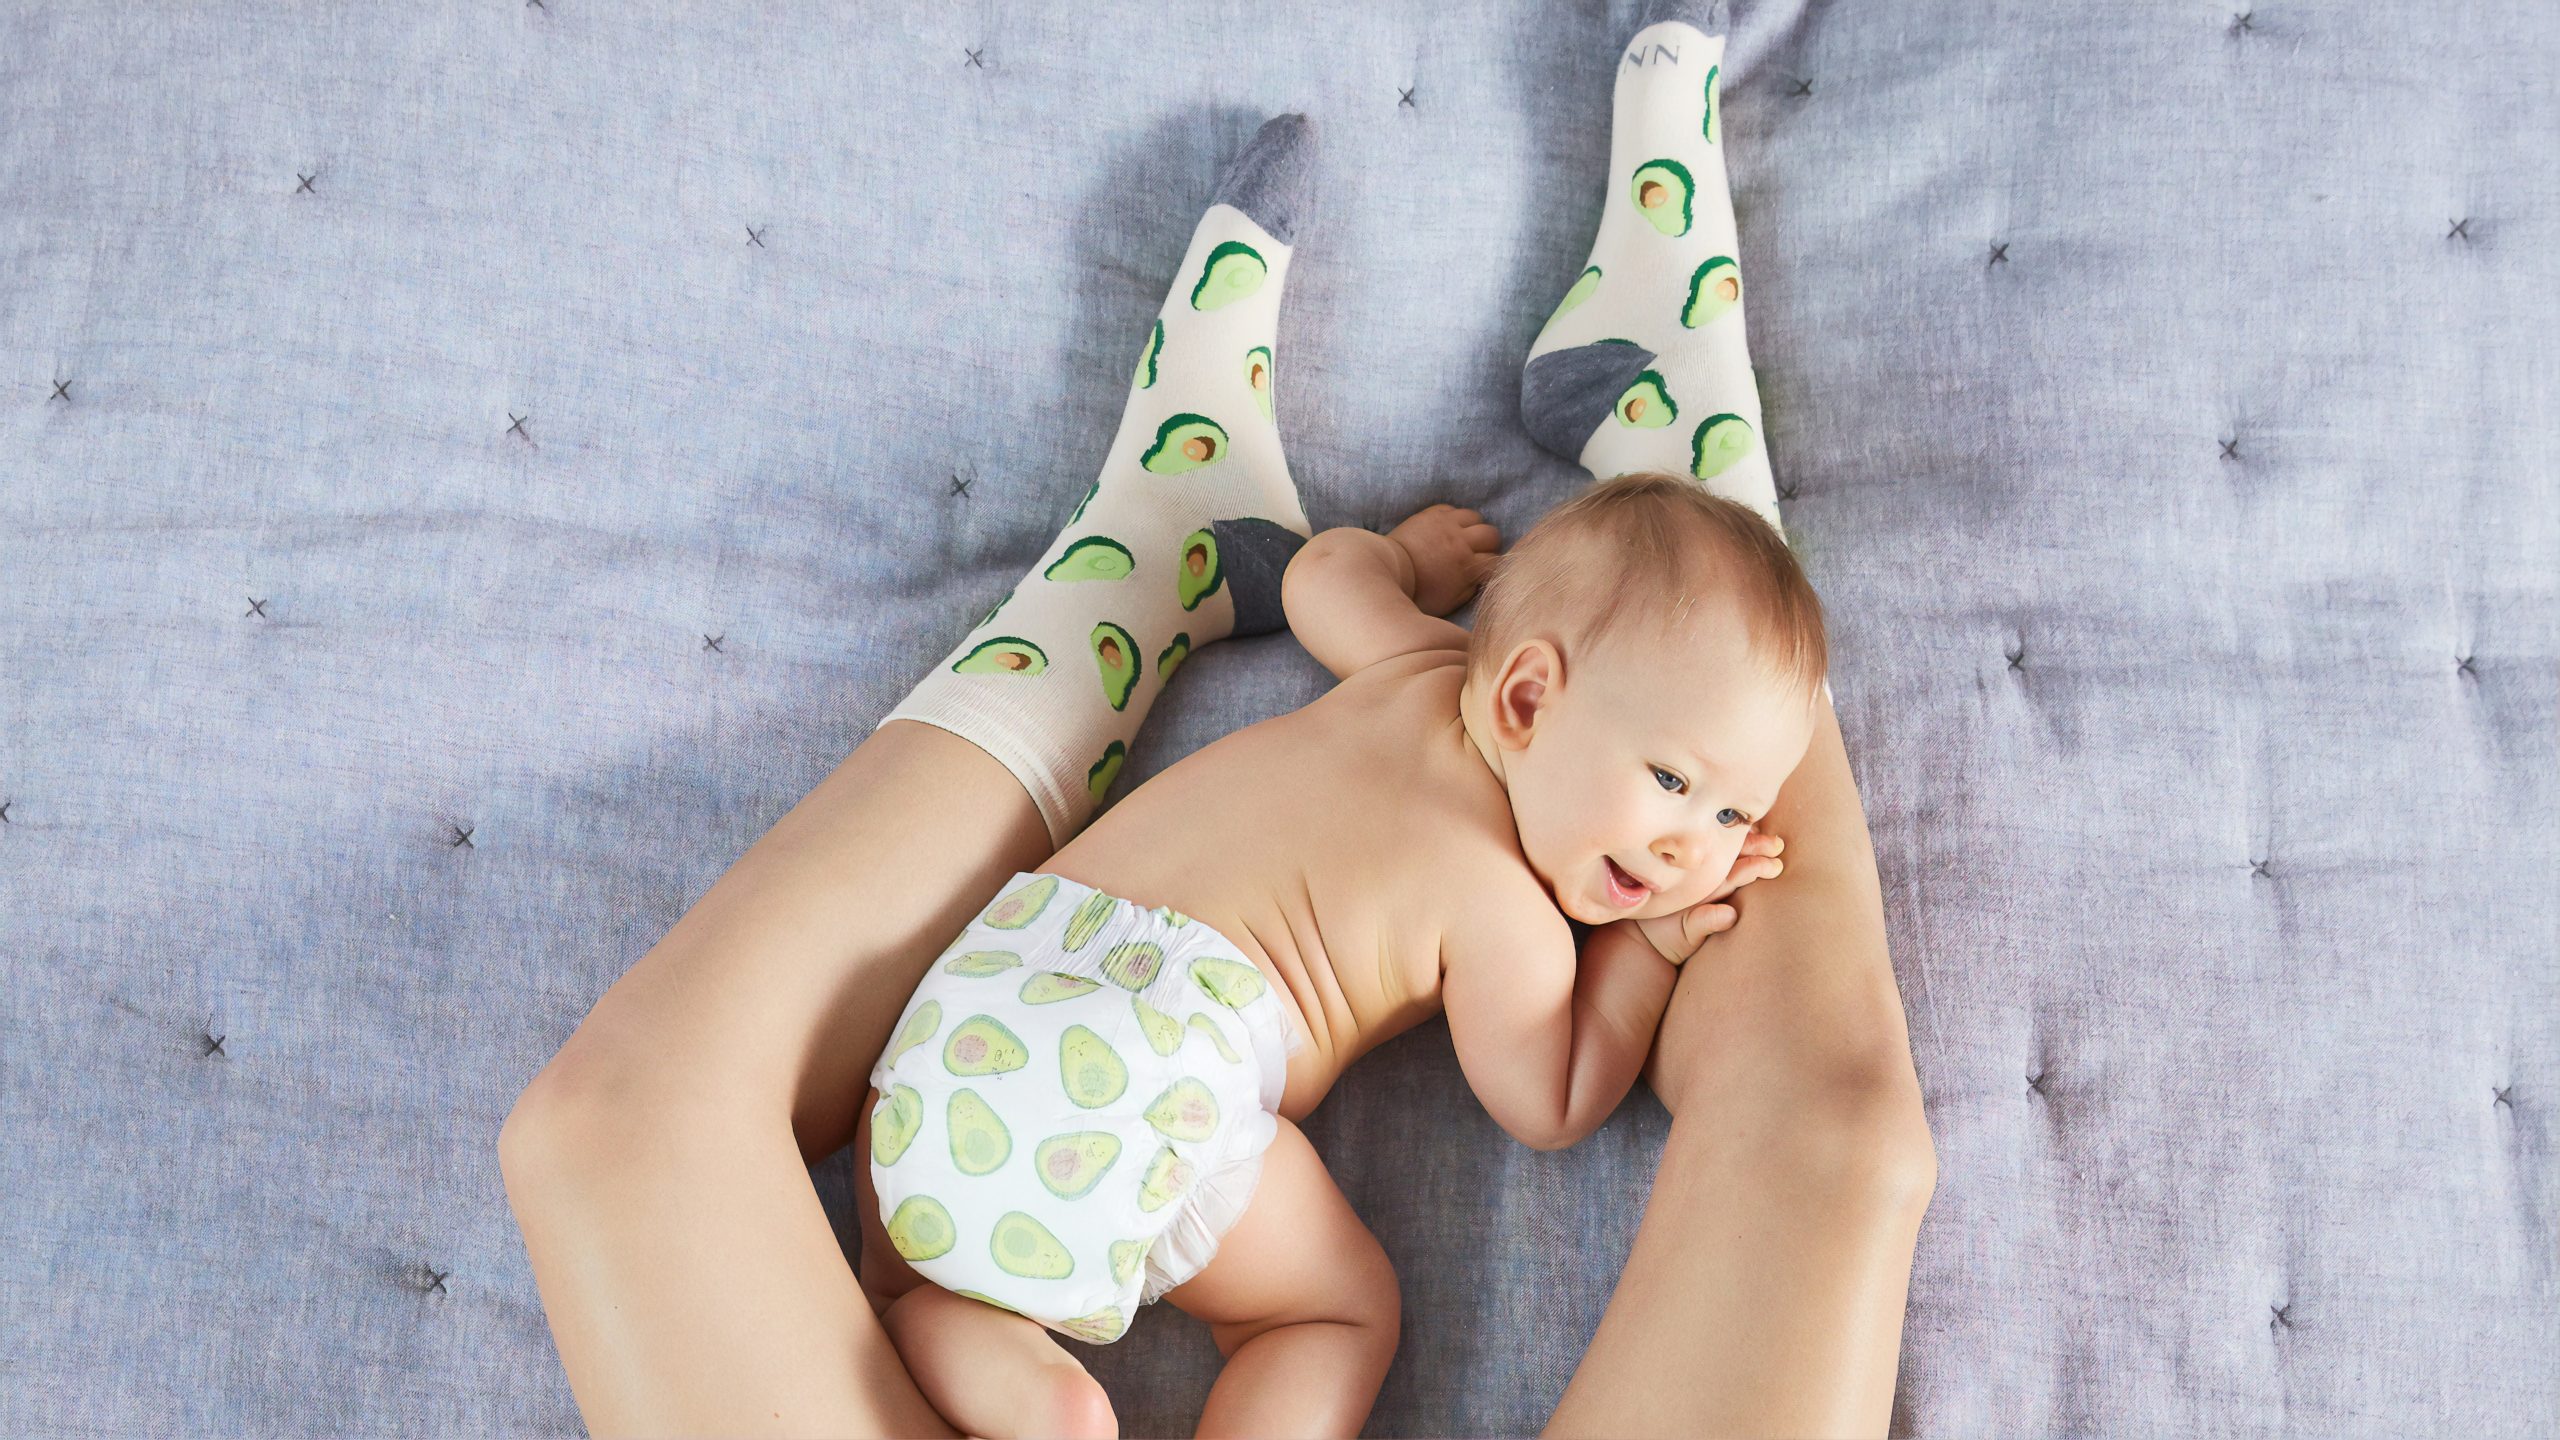 Lumi pamper is the smart diaper you never knew you needed